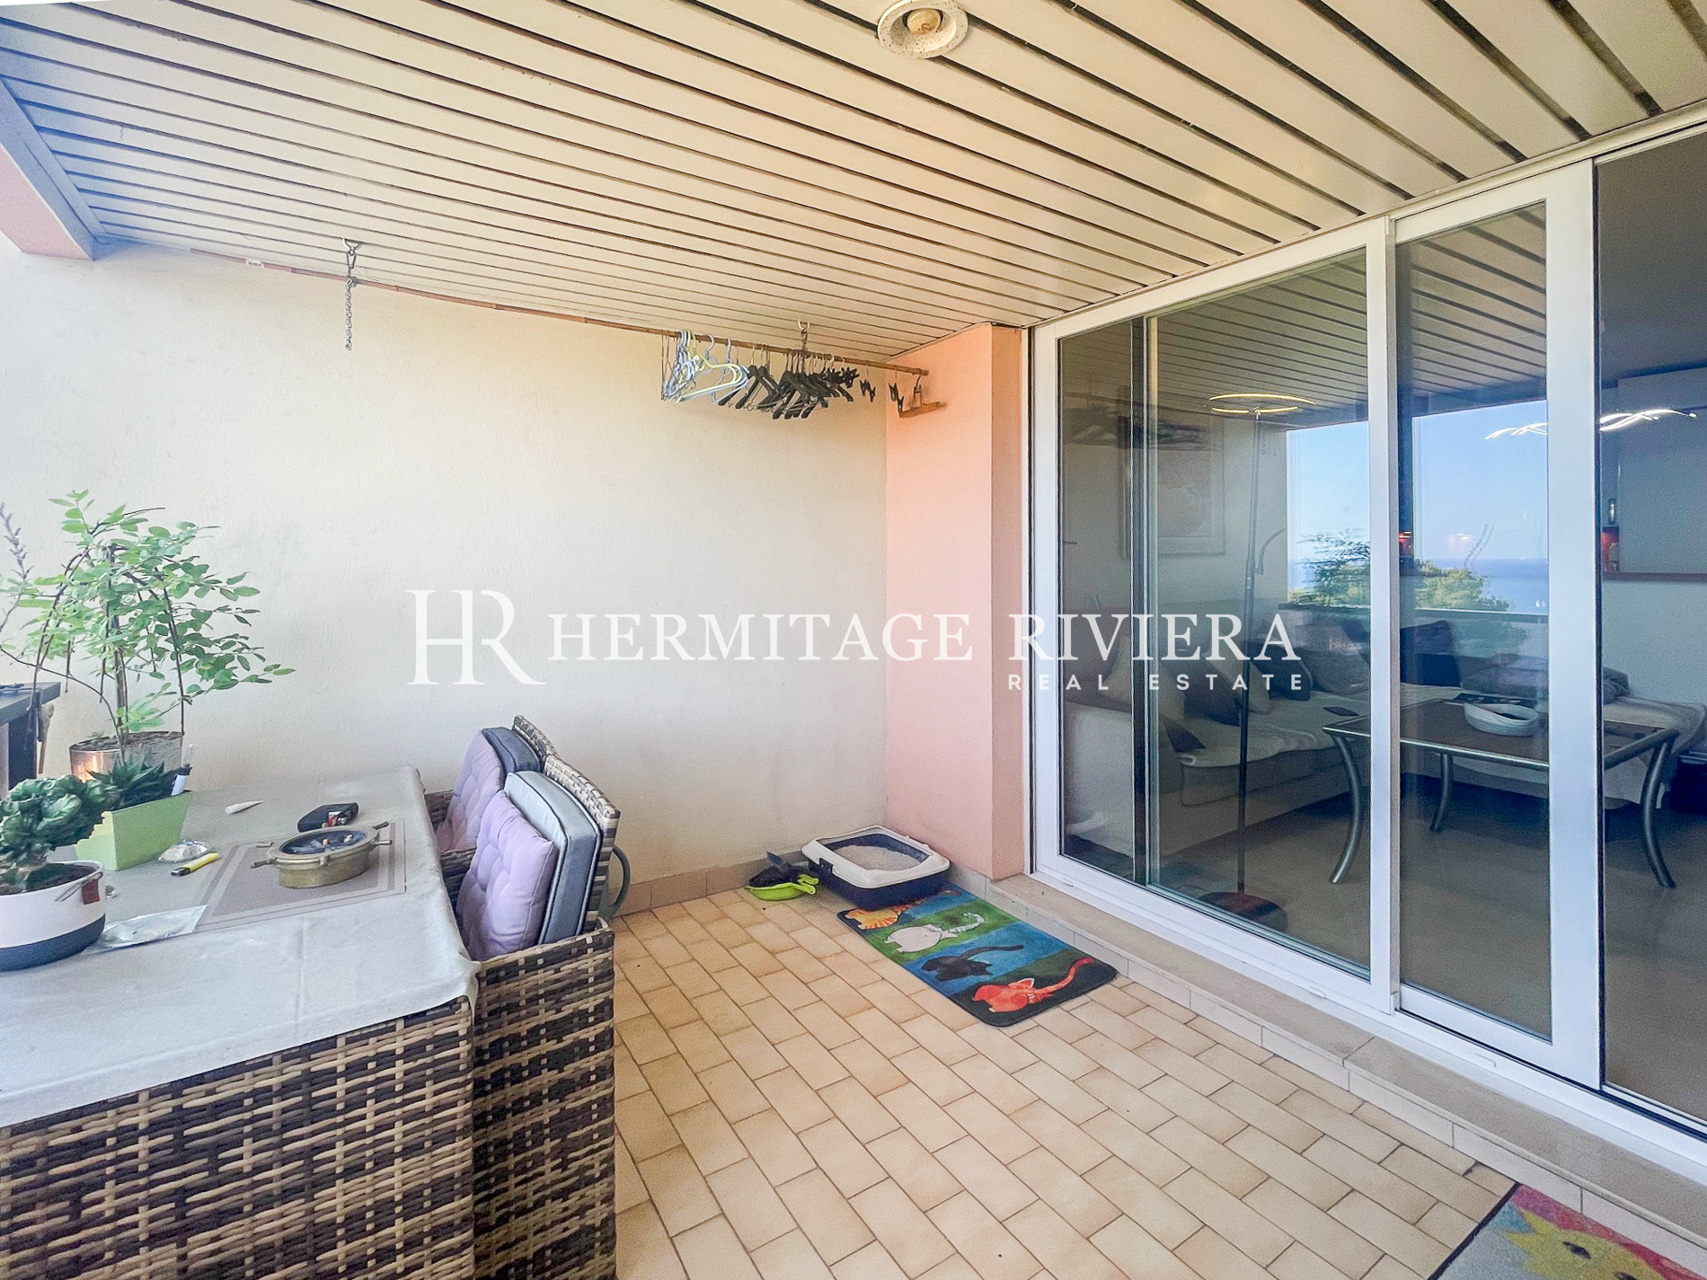 One bedroom apartment with loggia and sea view (image 2)